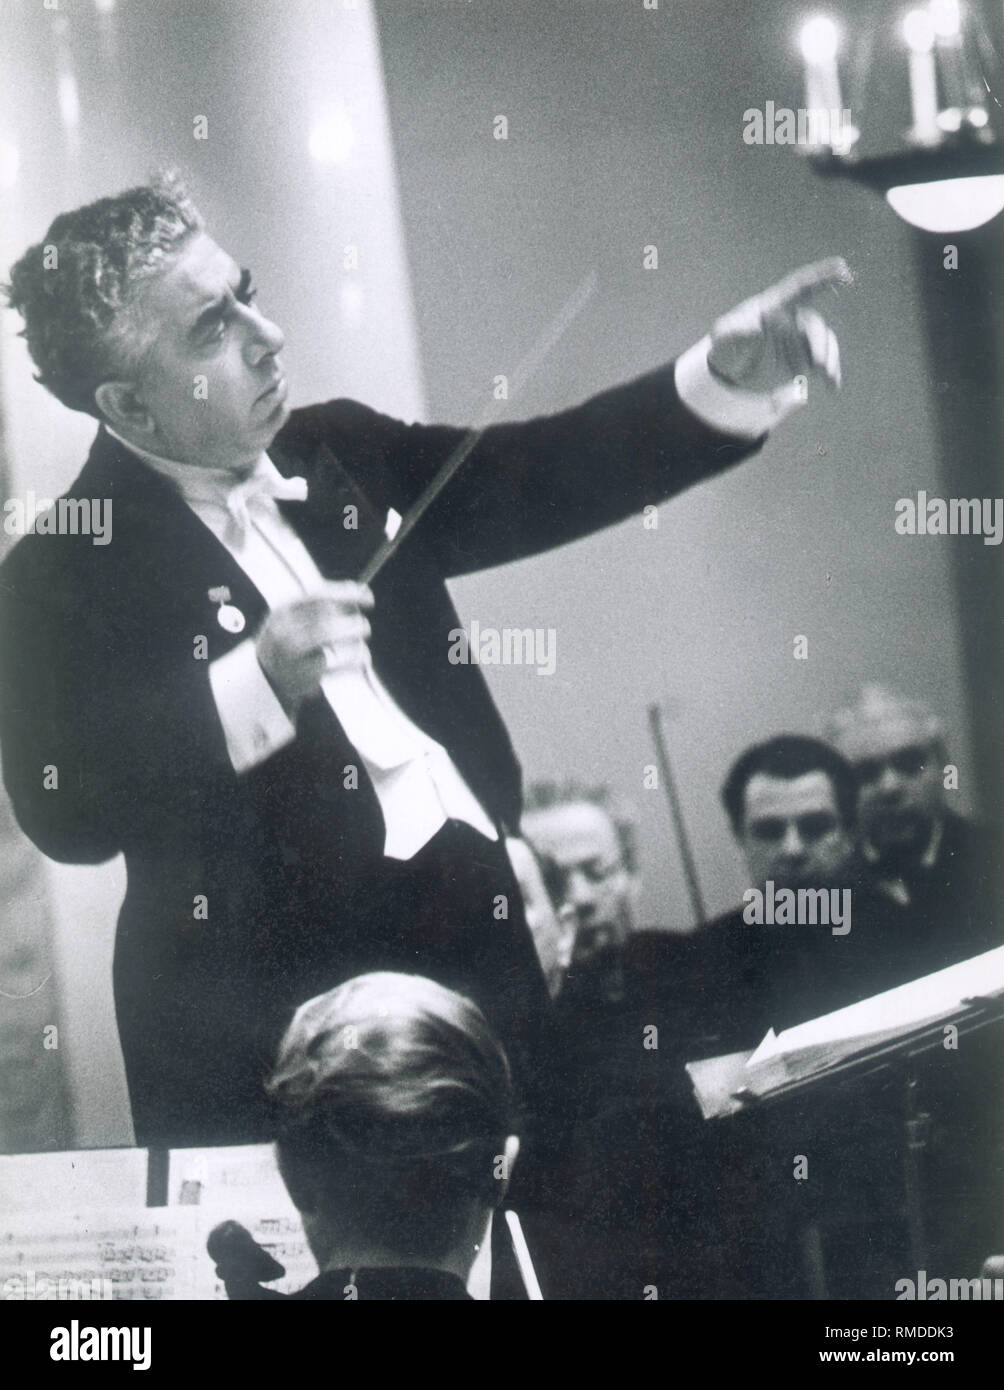 Conducted by the Composer Aram Khachaturian (1903-1978). Photograph Stock Photo